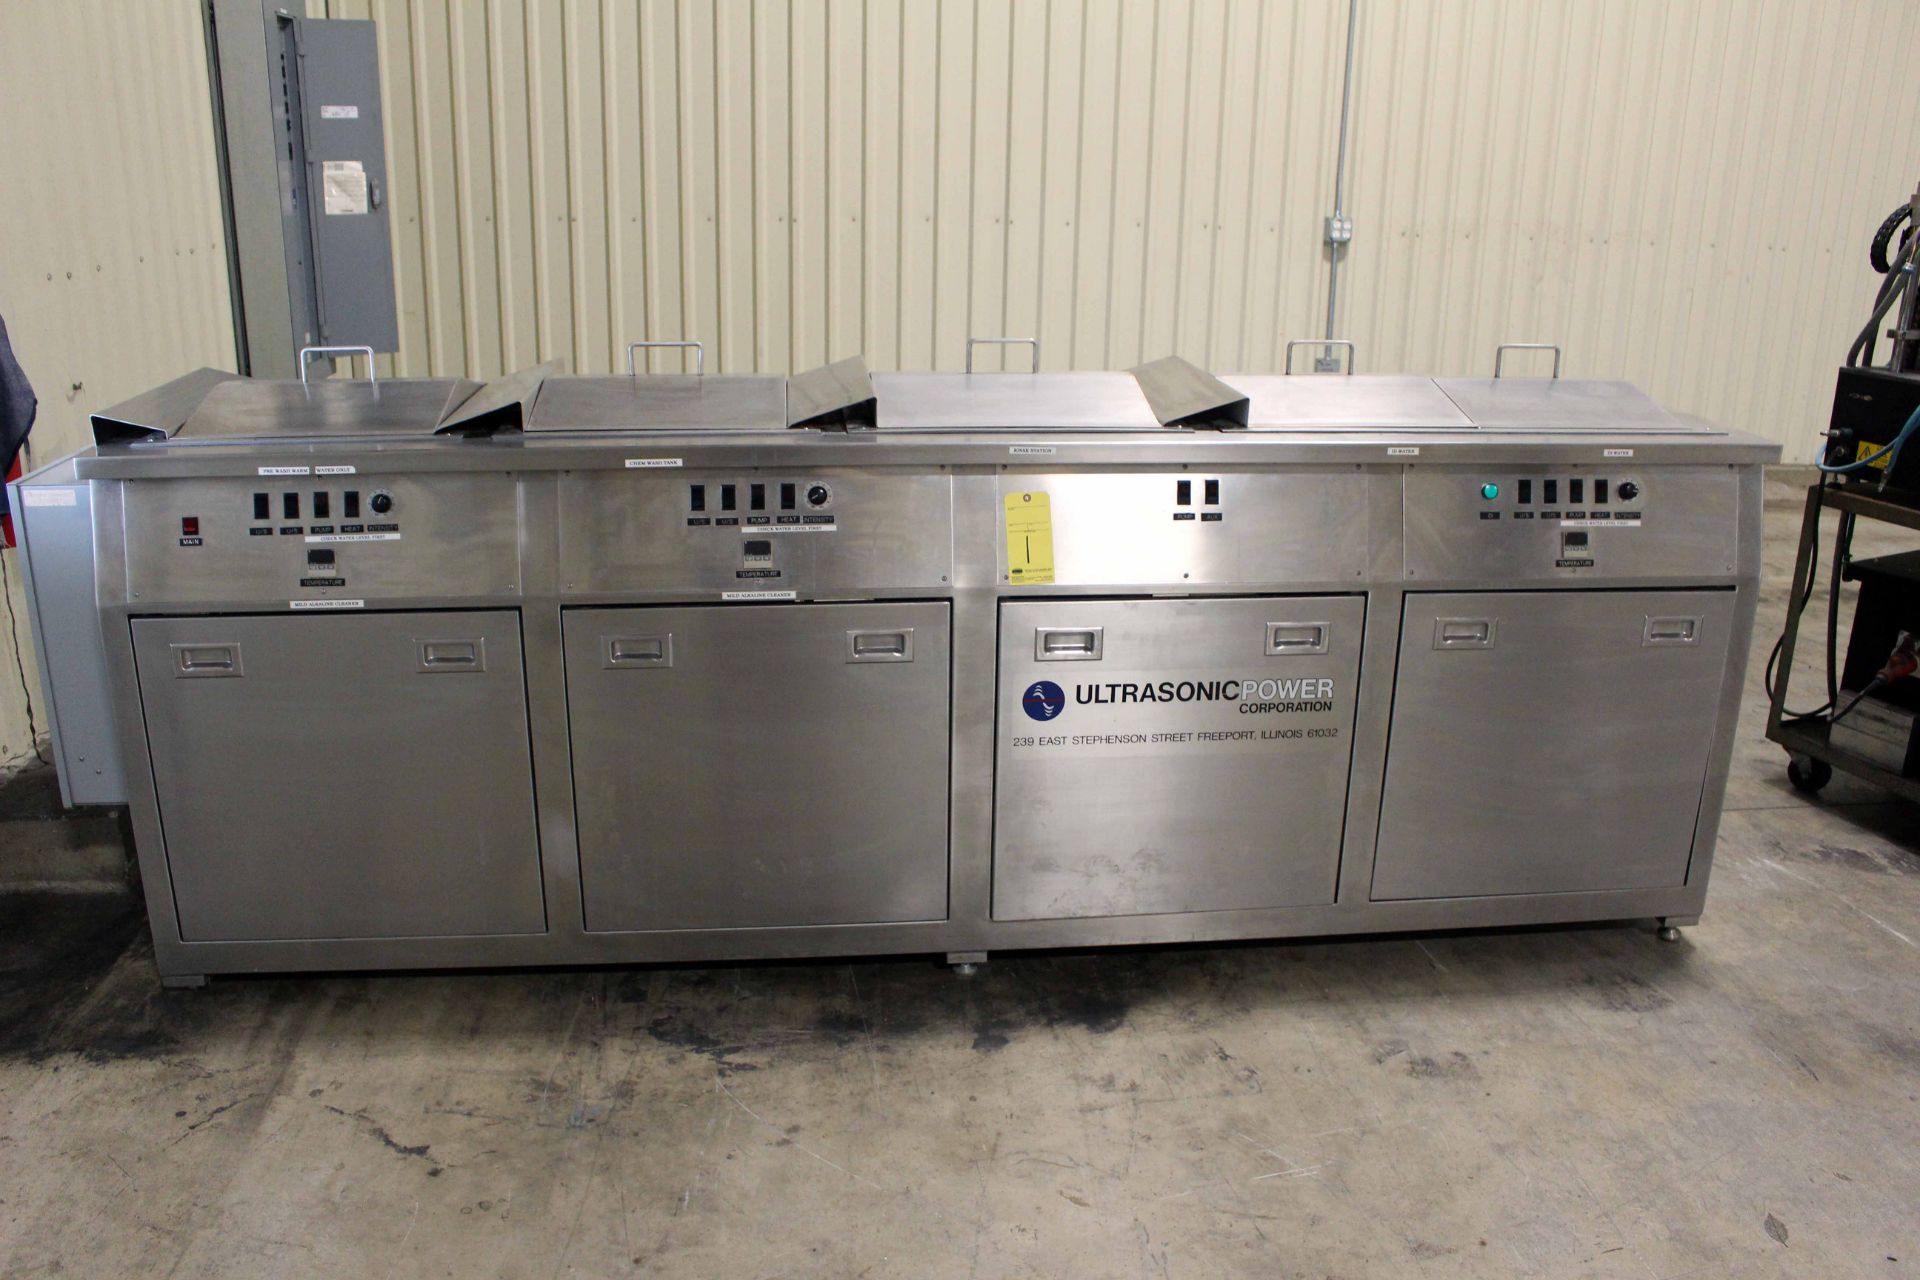 ULTRASONIC CLEANING SYSTEM, ULTRASONIC POWER CO. MDL. 51-15-133 4-STATION, 16"W. x 20'L. x 16" dp. - Image 2 of 2